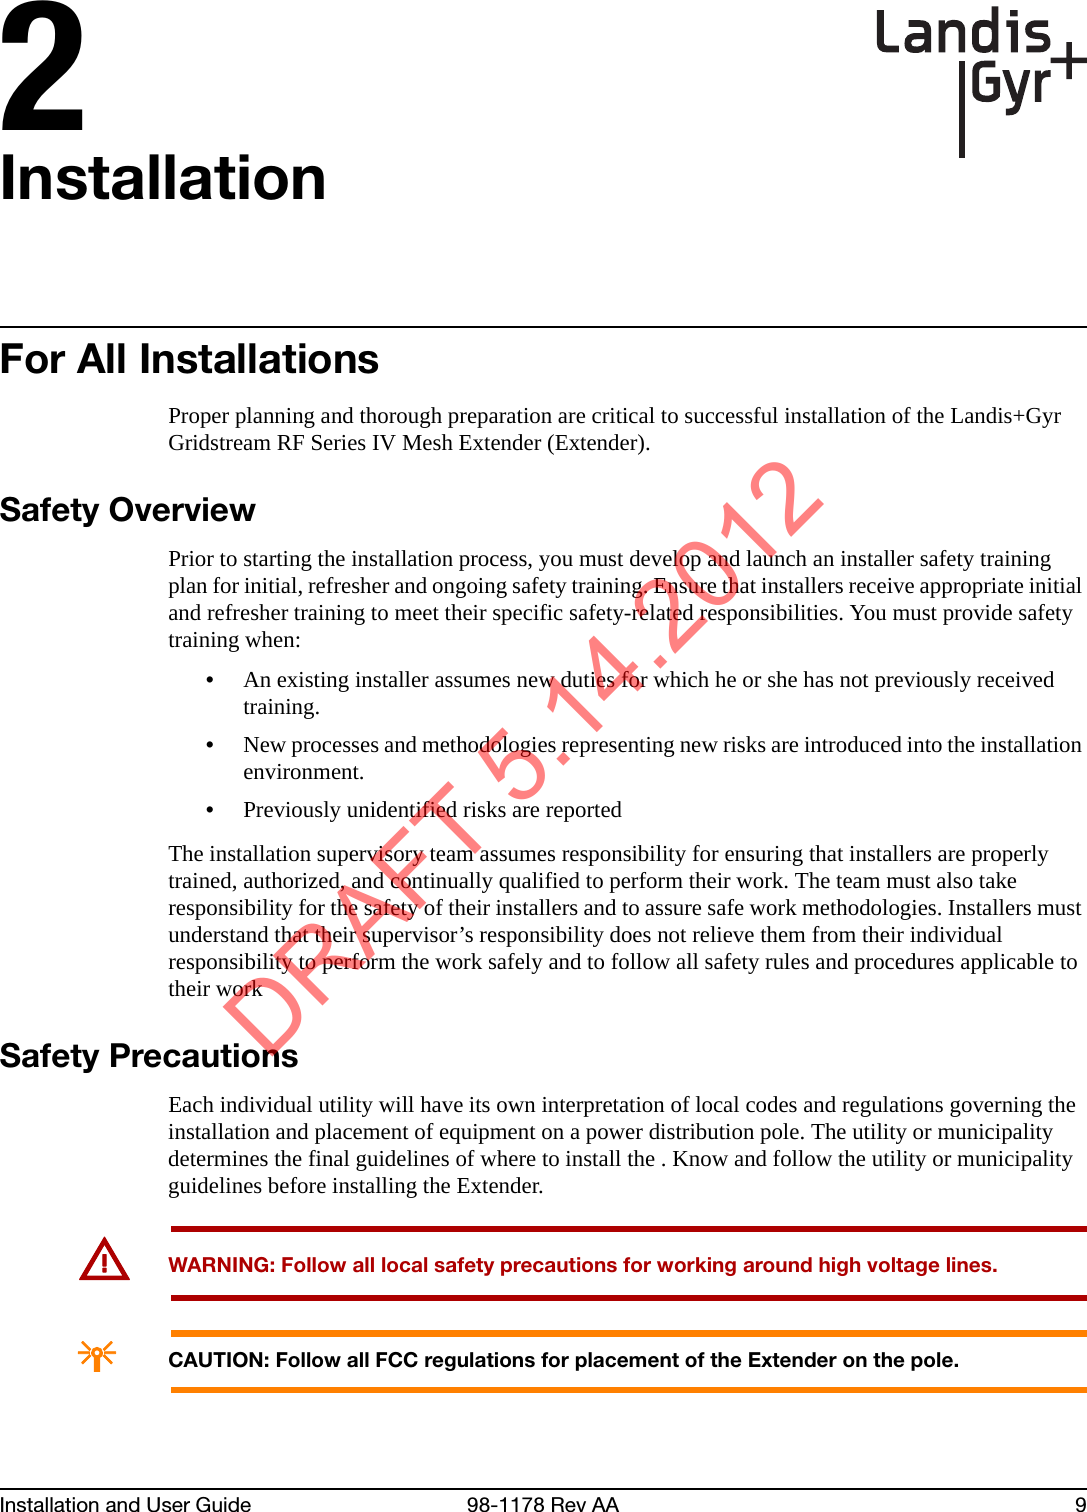 2Installation and User Guide 98-1178 Rev AA 9InstallationFor All InstallationsProper planning and thorough preparation are critical to successful installation of the Landis+Gyr Gridstream RF Series IV Mesh Extender (Extender).Safety OverviewPrior to starting the installation process, you must develop and launch an installer safety training plan for initial, refresher and ongoing safety training. Ensure that installers receive appropriate initial and refresher training to meet their specific safety-related responsibilities. You must provide safety training when:•An existing installer assumes new duties for which he or she has not previously received training.•New processes and methodologies representing new risks are introduced into the installation environment.•Previously unidentified risks are reportedThe installation supervisory team assumes responsibility for ensuring that installers are properly trained, authorized, and continually qualified to perform their work. The team must also take responsibility for the safety of their installers and to assure safe work methodologies. Installers must understand that their supervisor’s responsibility does not relieve them from their individual responsibility to perform the work safely and to follow all safety rules and procedures applicable to their workSafety PrecautionsEach individual utility will have its own interpretation of local codes and regulations governing the installation and placement of equipment on a power distribution pole. The utility or municipality determines the final guidelines of where to install the . Know and follow the utility or municipality guidelines before installing the Extender.UWARNING: Follow all local safety precautions for working around high voltage lines.ACAUTION: Follow all FCC regulations for placement of the Extender on the pole.DRAFT 5.14.2012